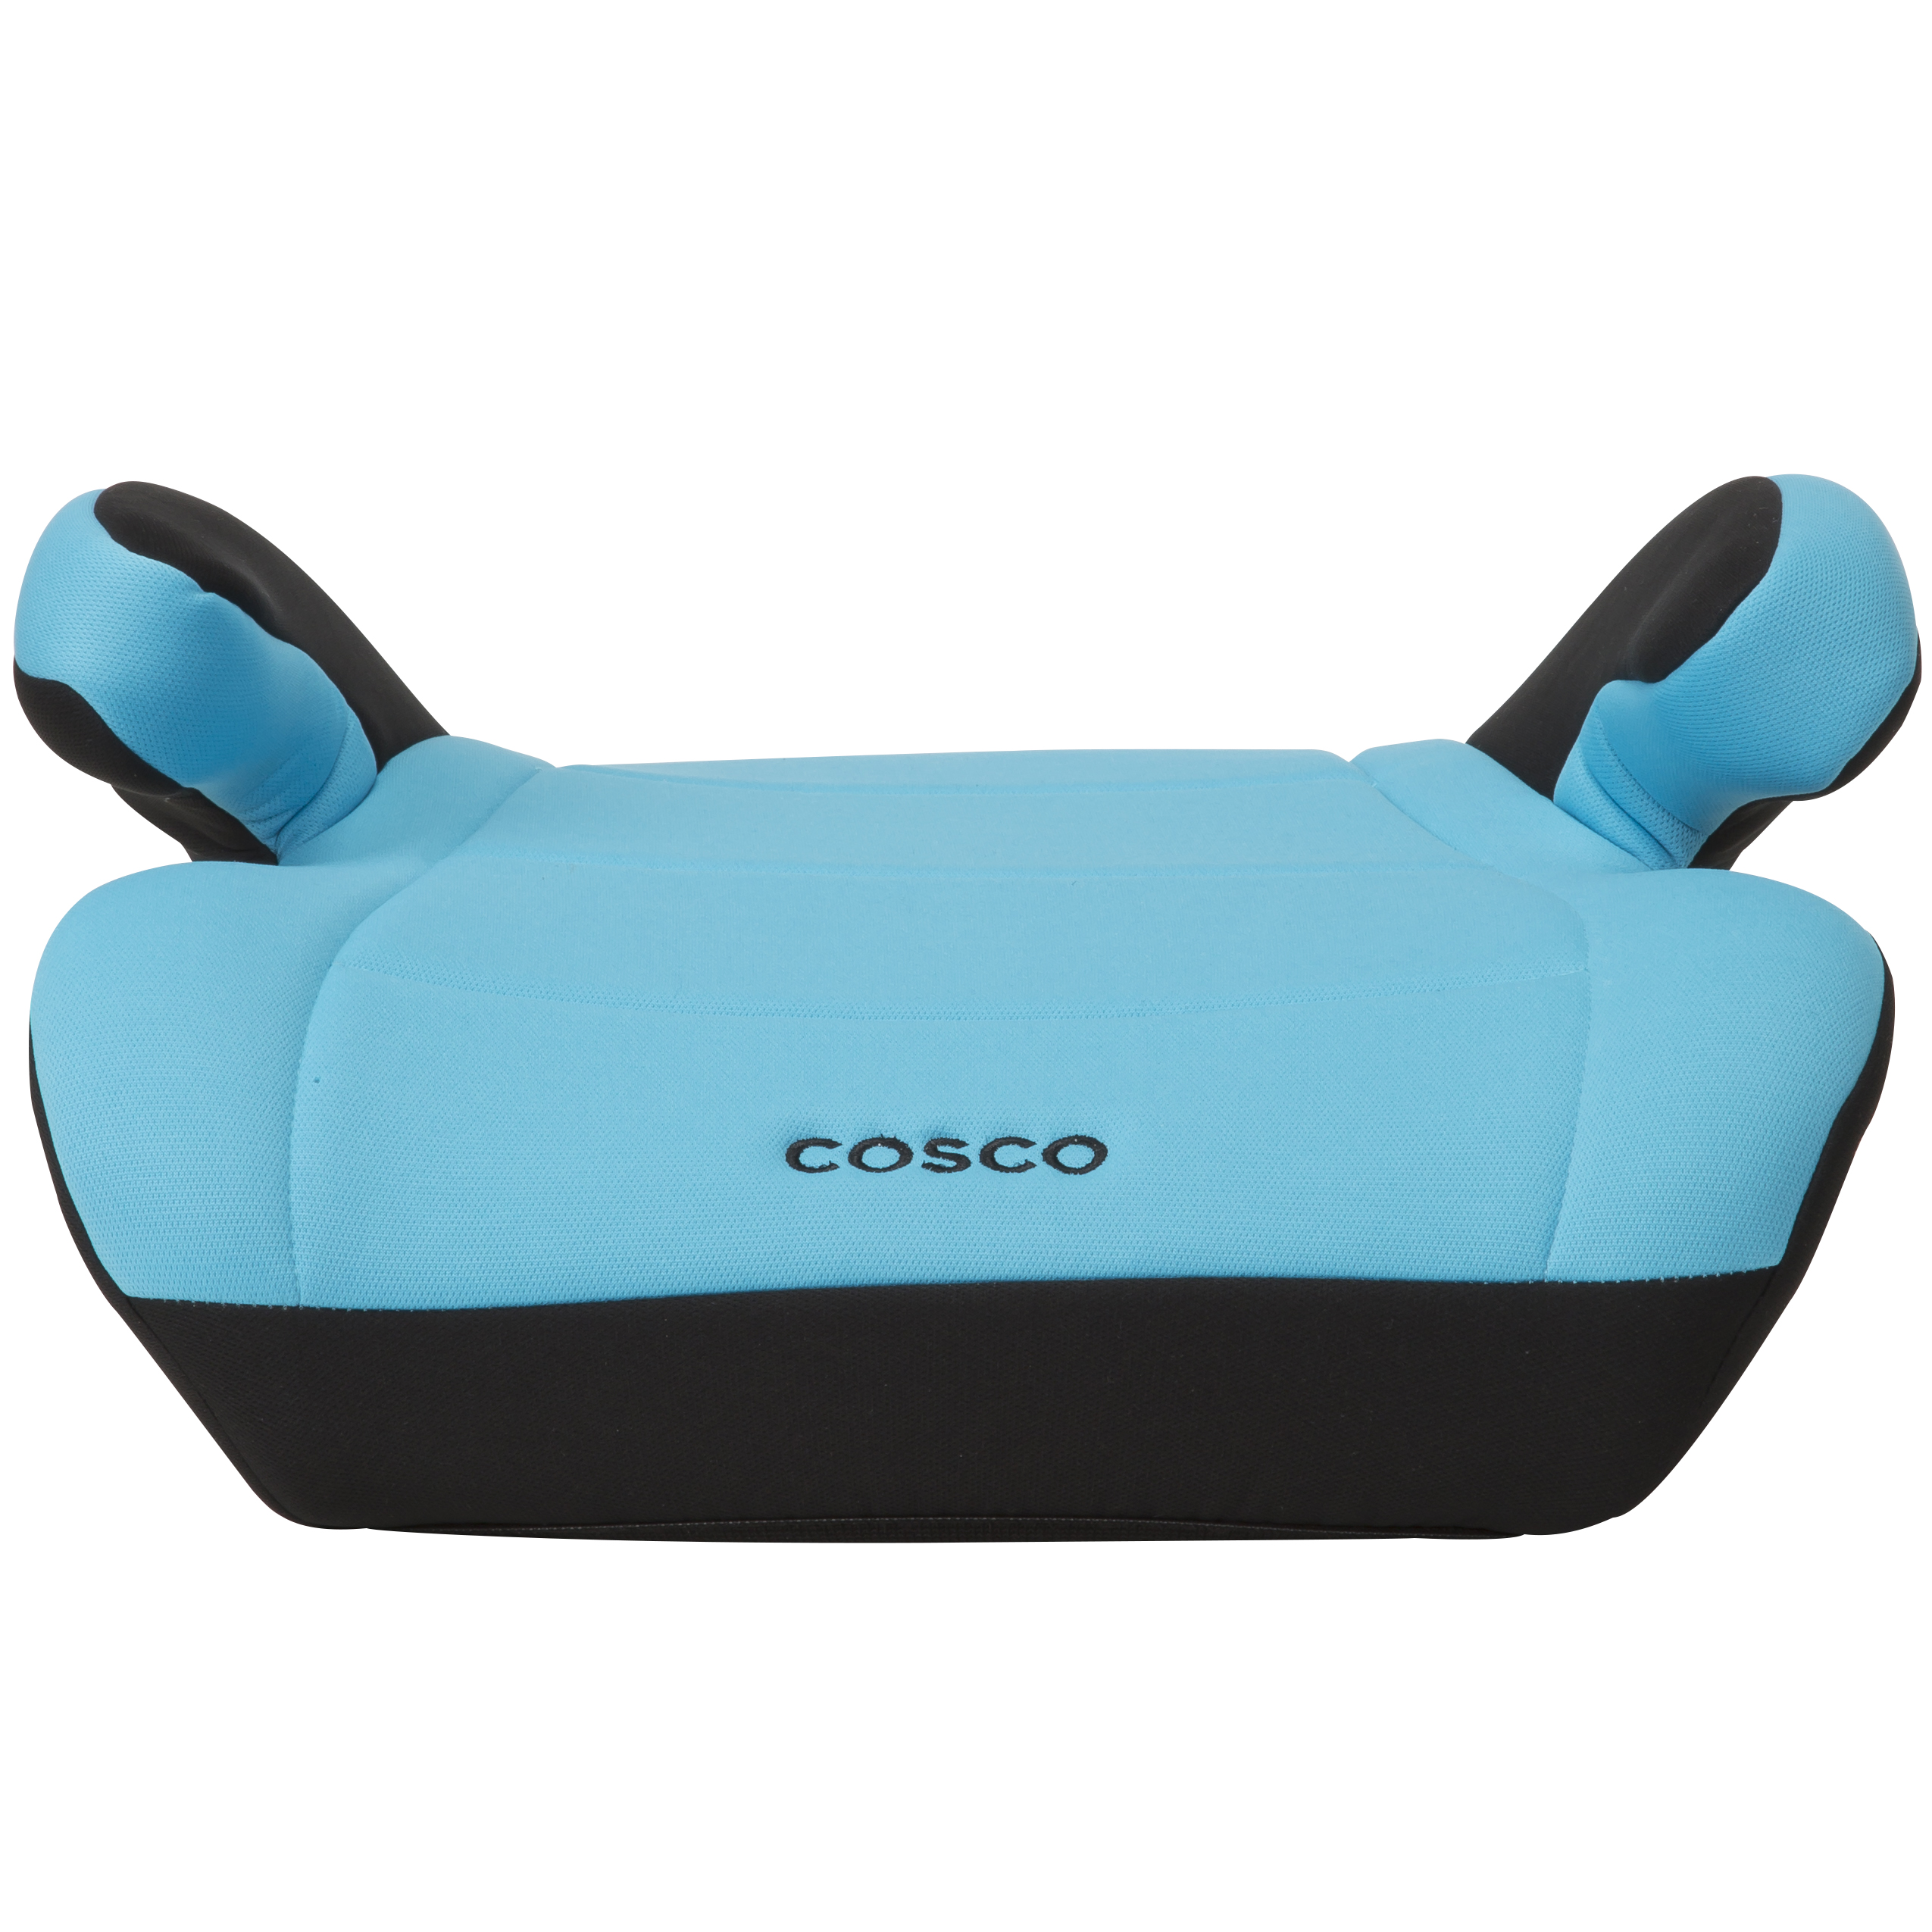 Cosco Topside Booster Car Seat, Turquoise - image 4 of 5